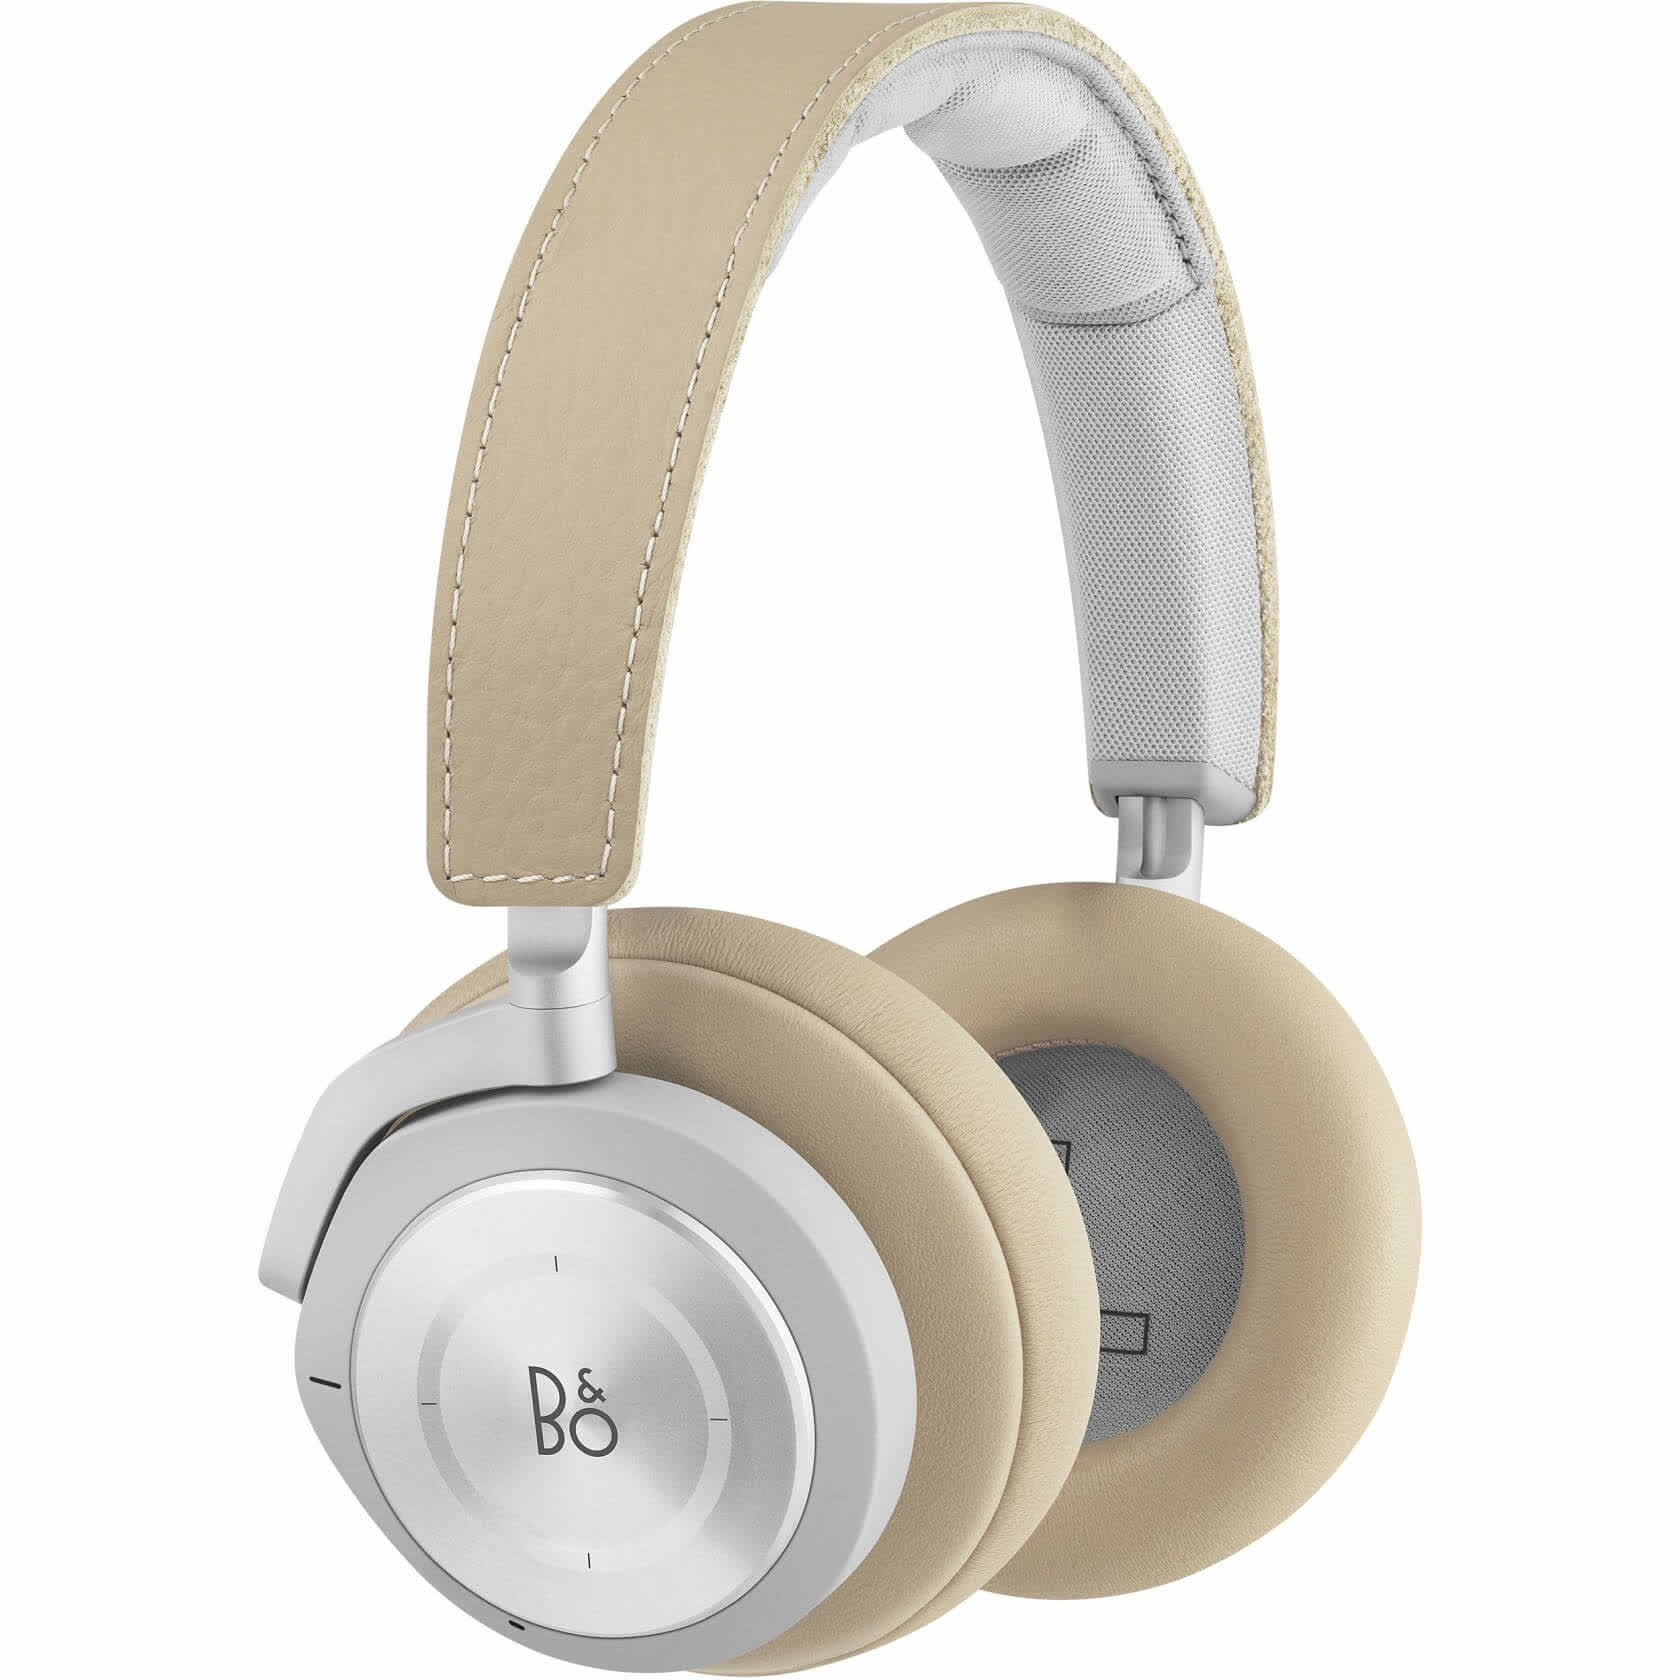 Bang & Olufsen Beoplay H9i Reviews, Pros and Cons, Price Tracking